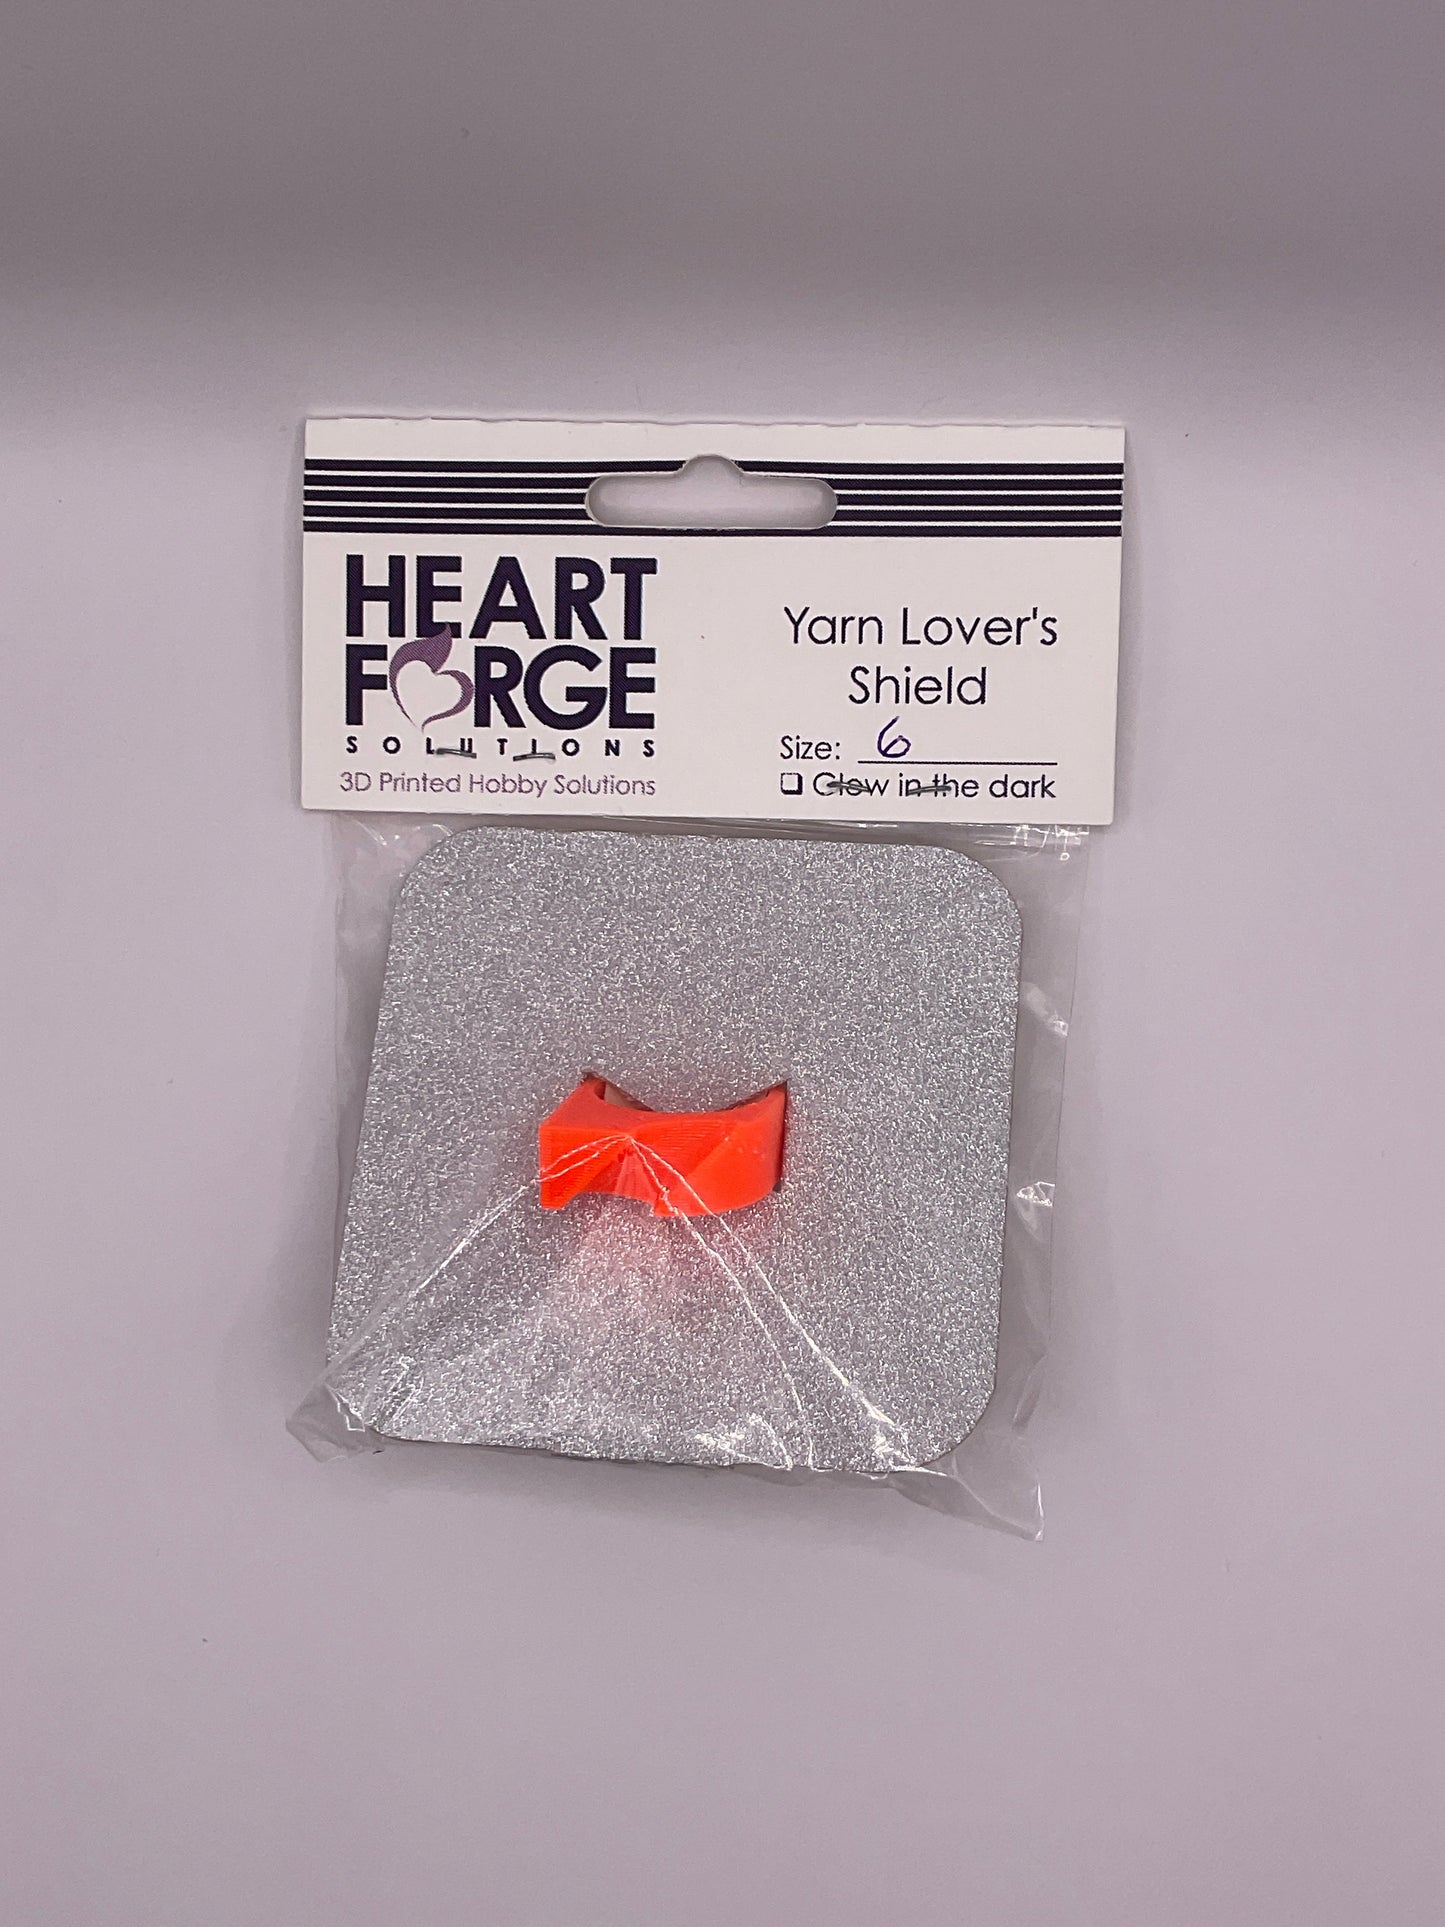 Yarn Lover's Shield Heart Forge Solutions